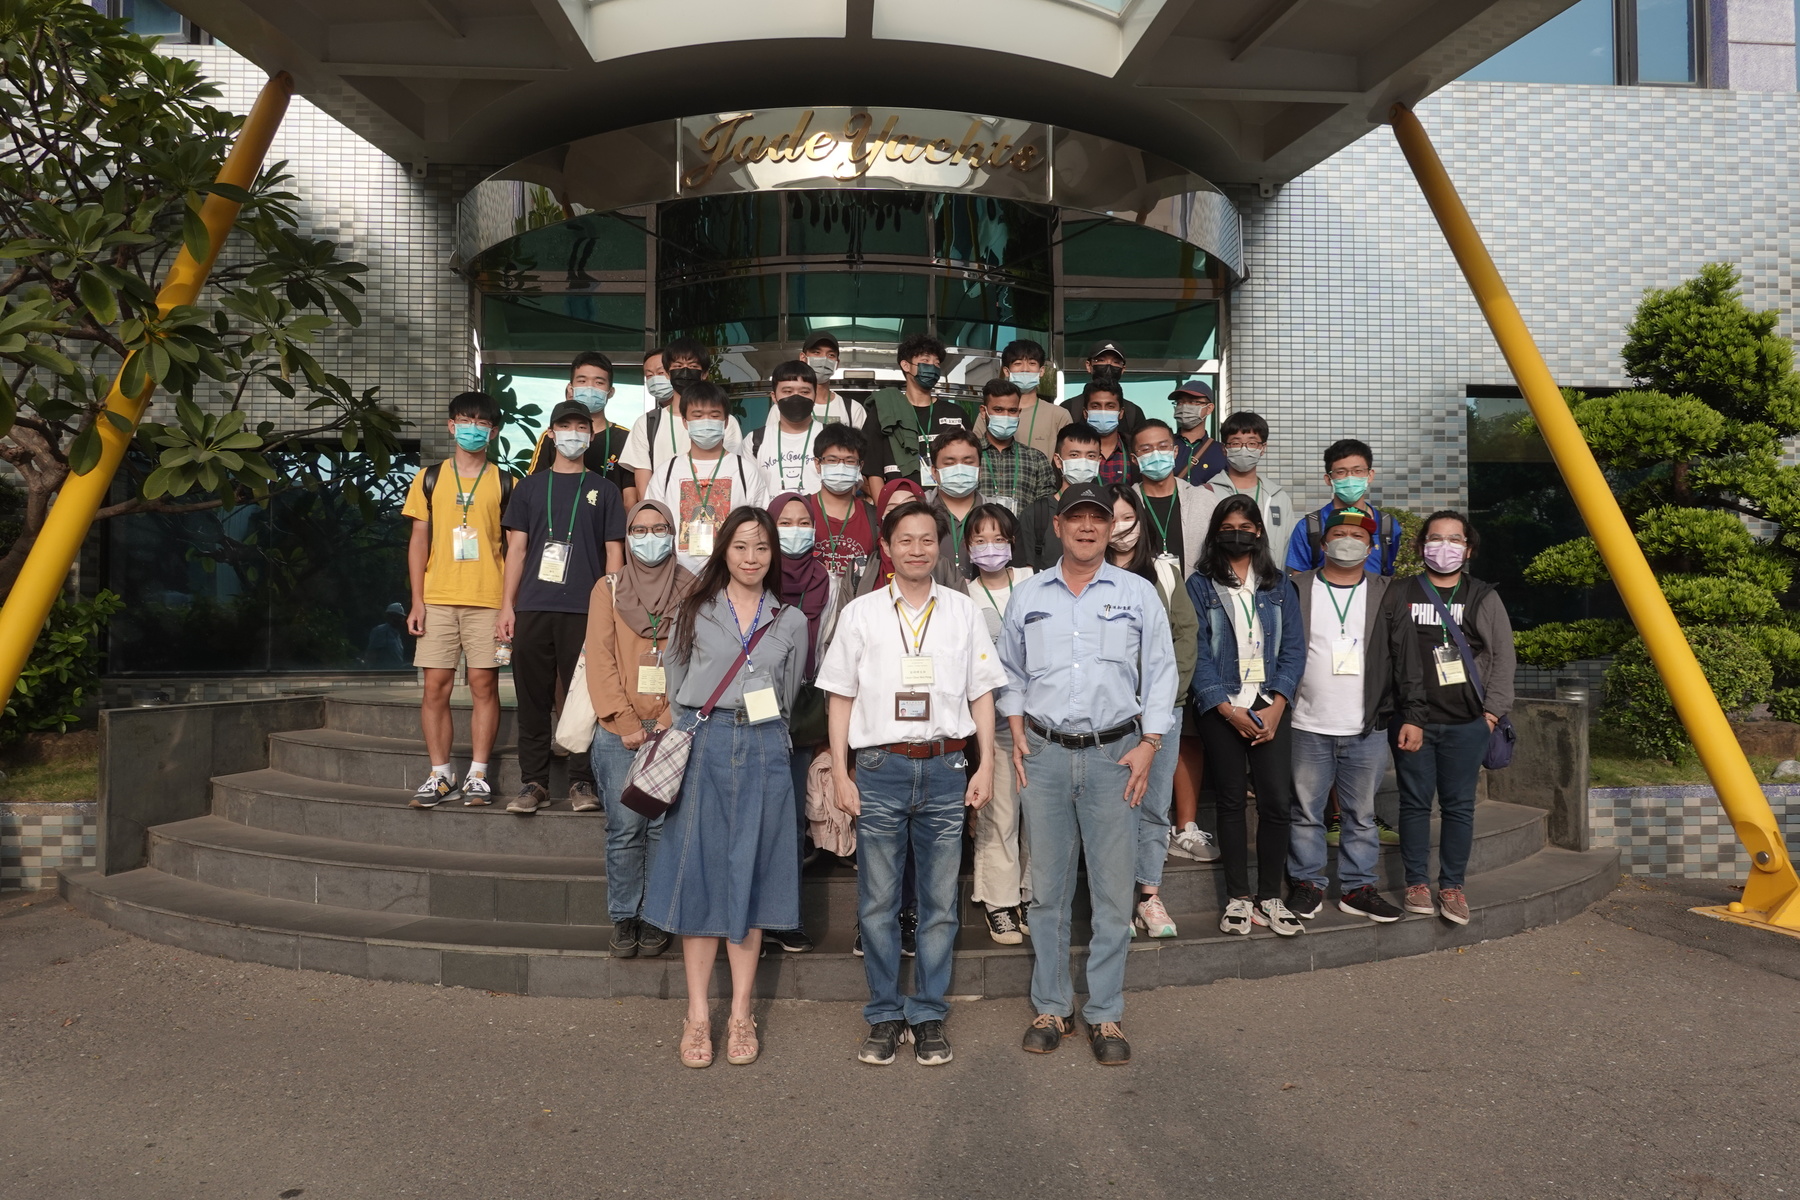 The tour participants in front of the Jong Shyn Shipbuilding Corporation.